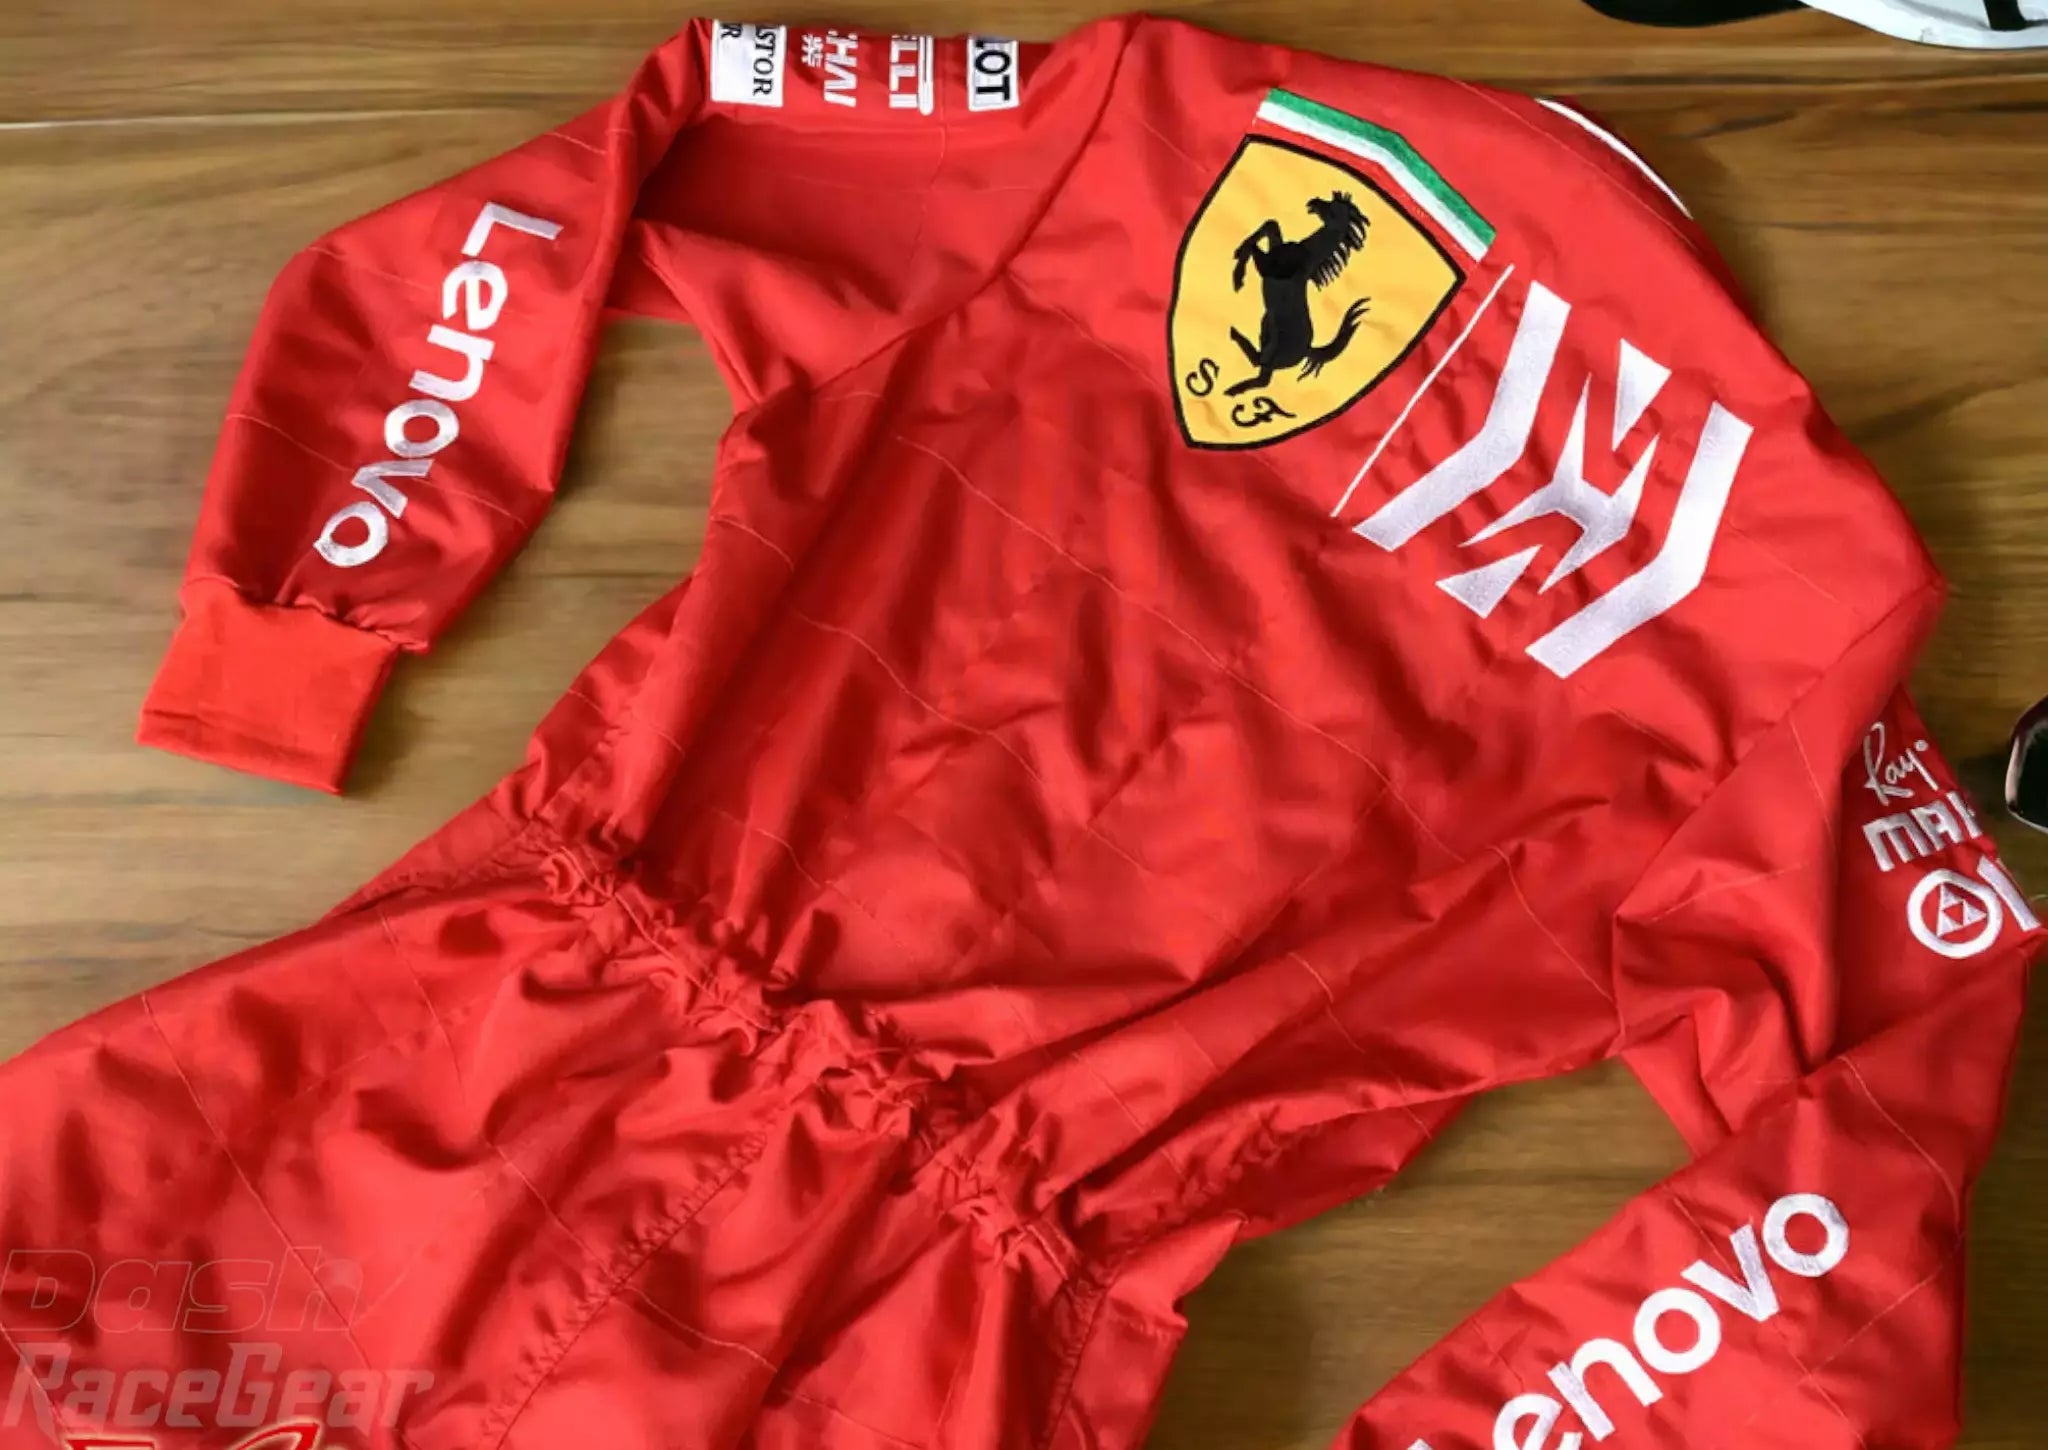 2019 Charles Leclerc Ferrari Mission Winnow F1 Embroidered Racing Suit